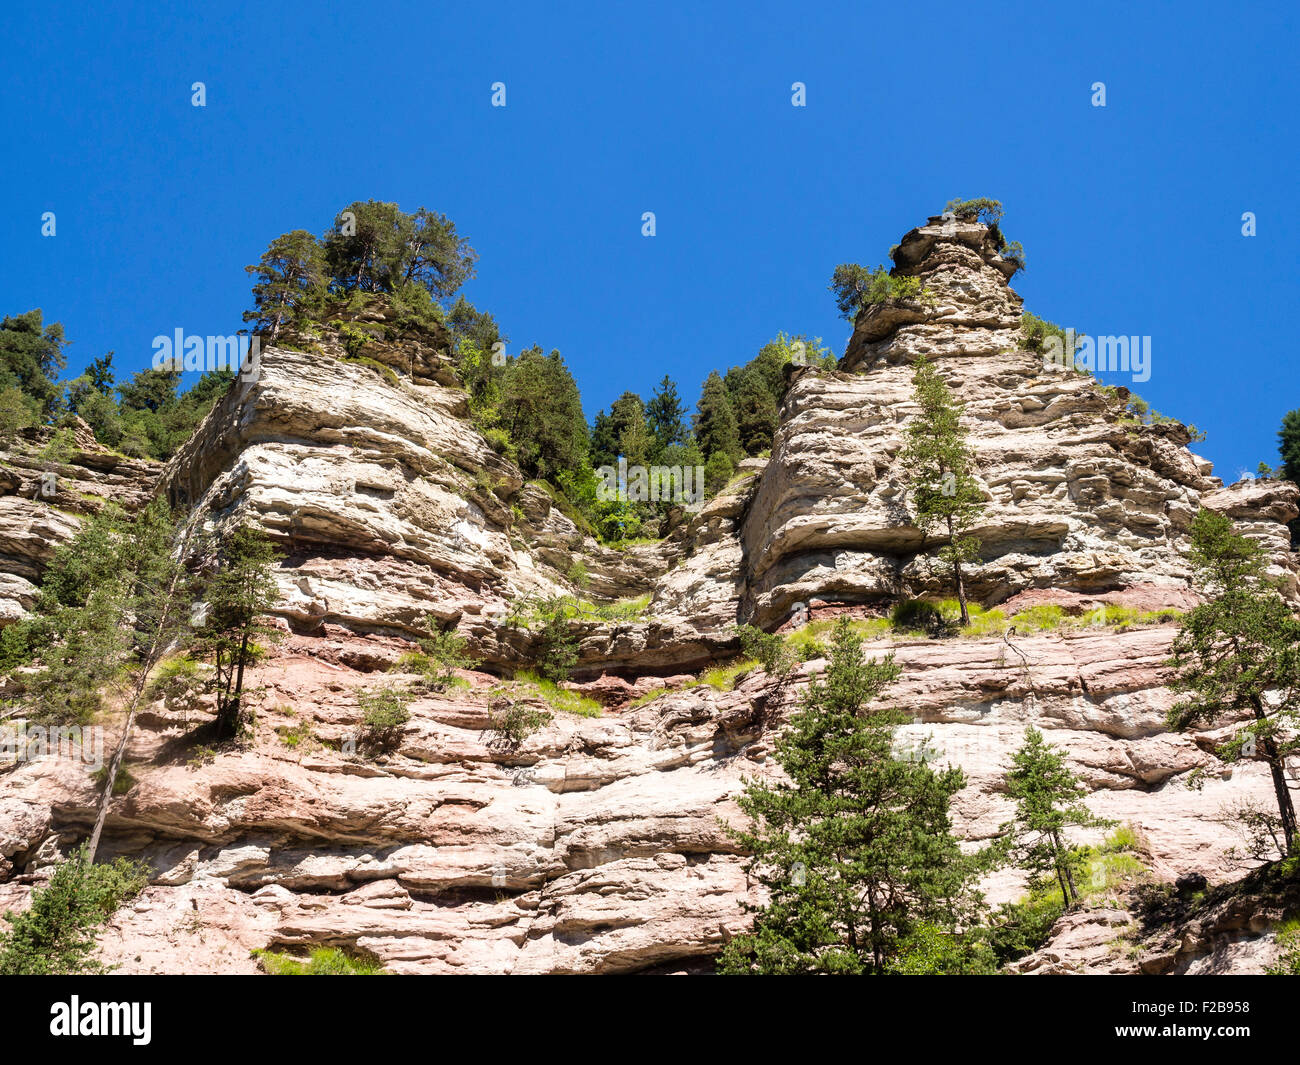 GEOPARC Bletterbach canyon, layers of sediments, stratum, Aldein, south Tyrolia, Italy Stock Photo